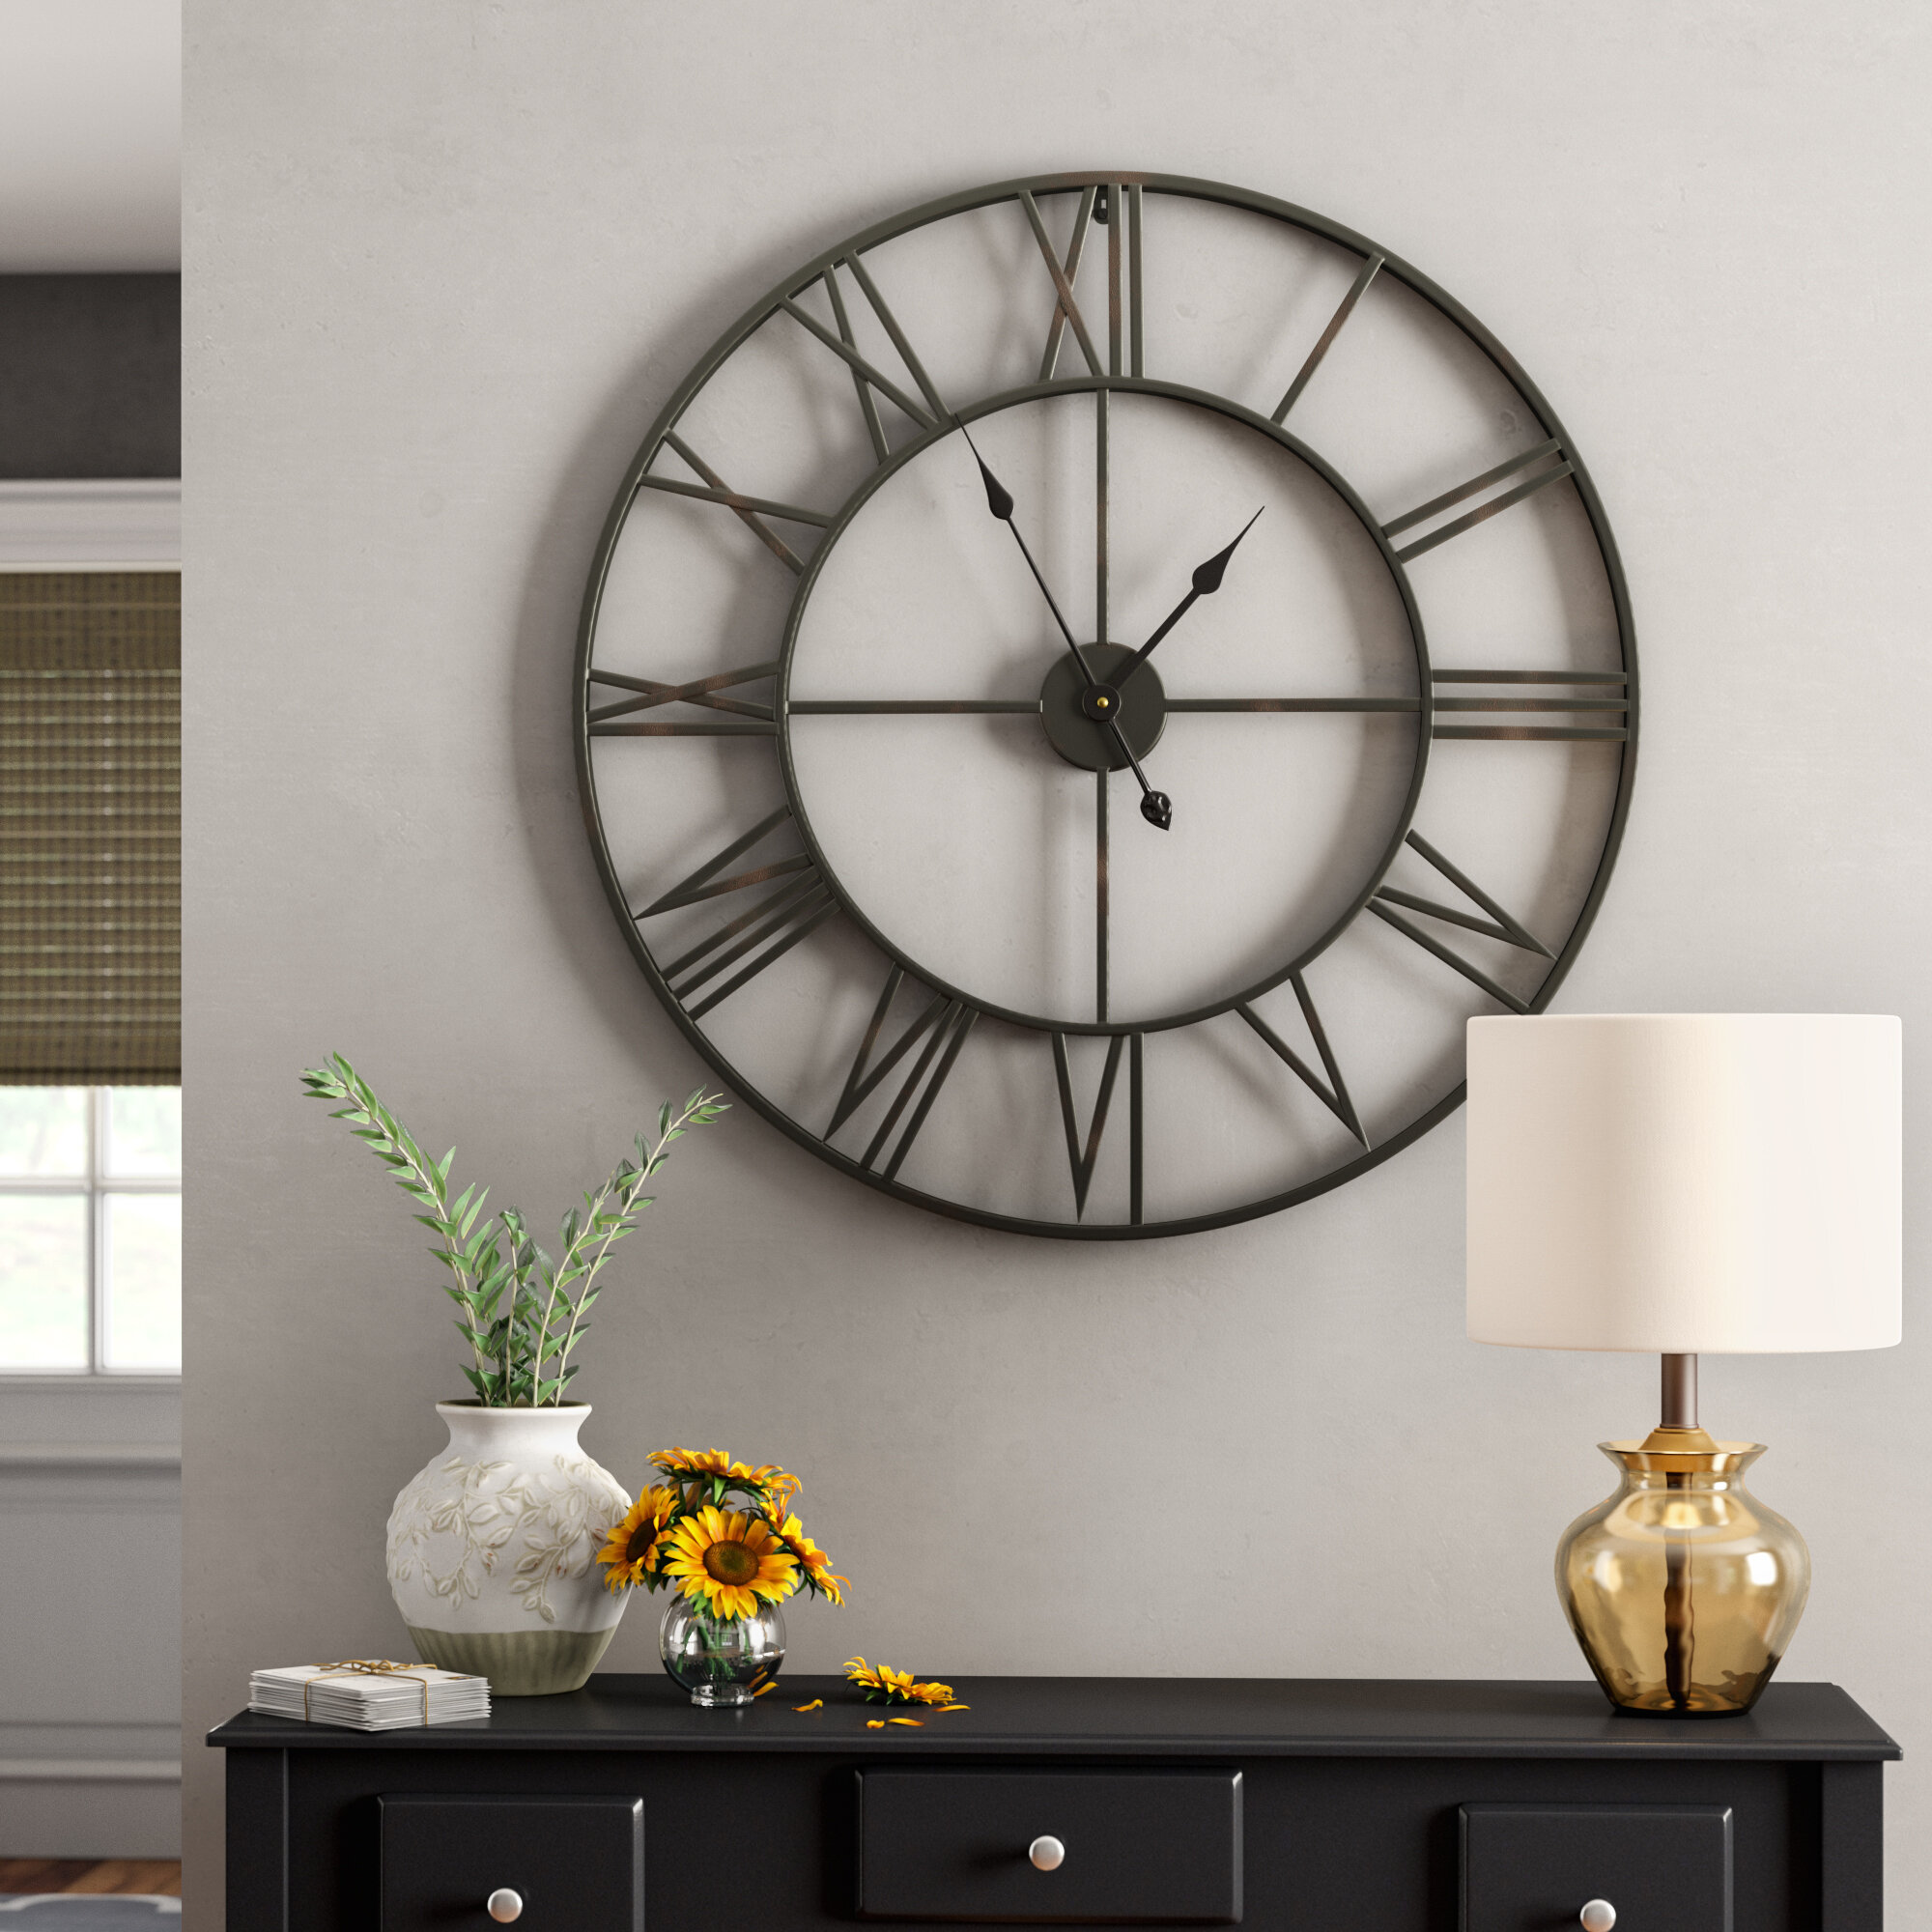 Cracked Large Wall Clock Industrial Wall Clock Unique Wall Clock Clocks for Wall Modern Wall Clock